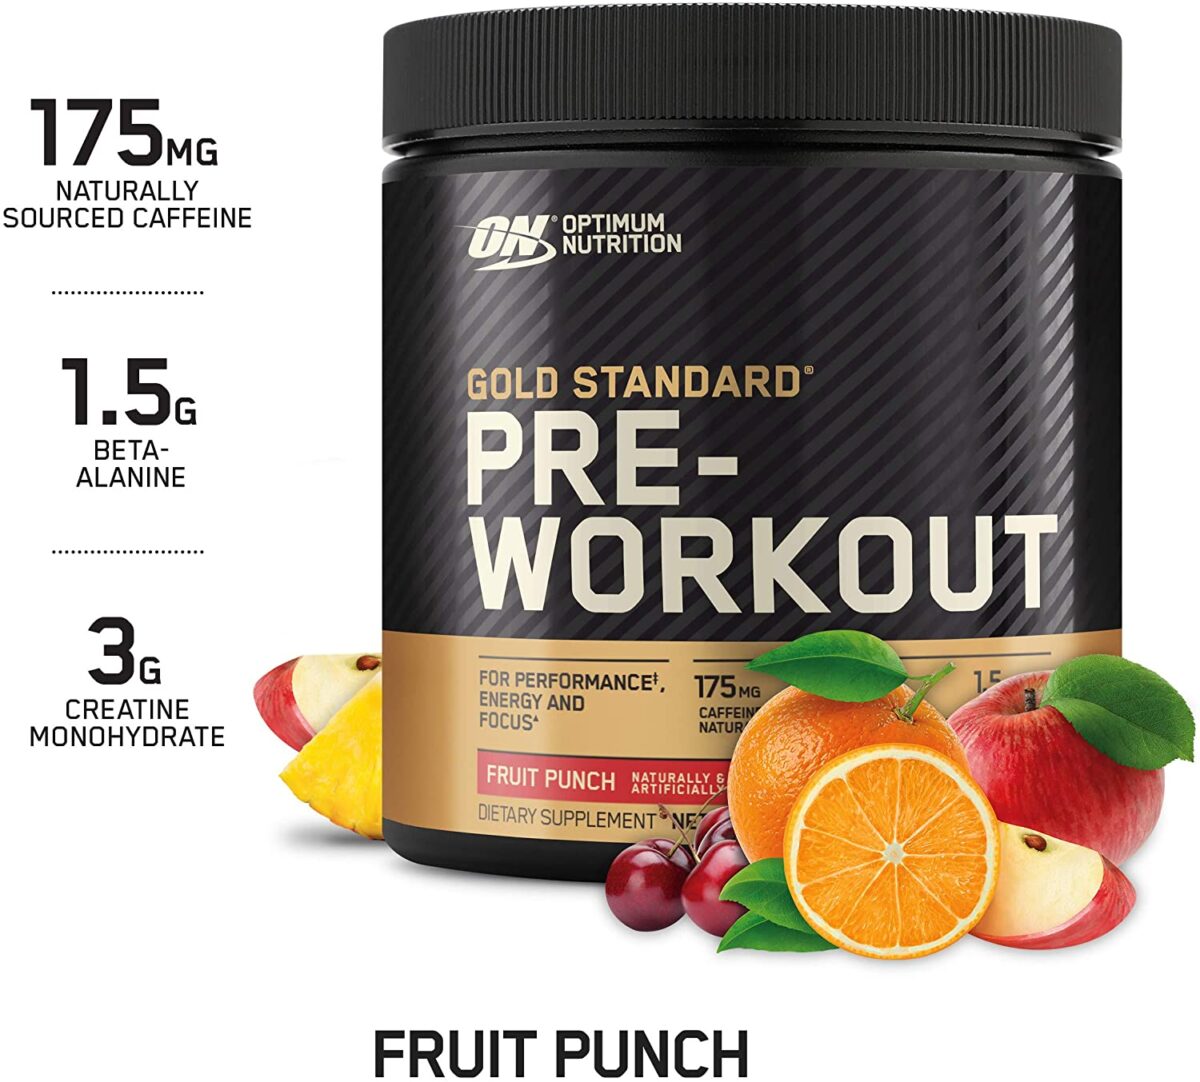 Optimum Nutrition Gold Standard Pre-Workout, Vitamin D for Immune Support, with Creatine, Beta-Alanine, and Caffeine for Energy, Keto Friendly, Fruit Punch, 30 Servings